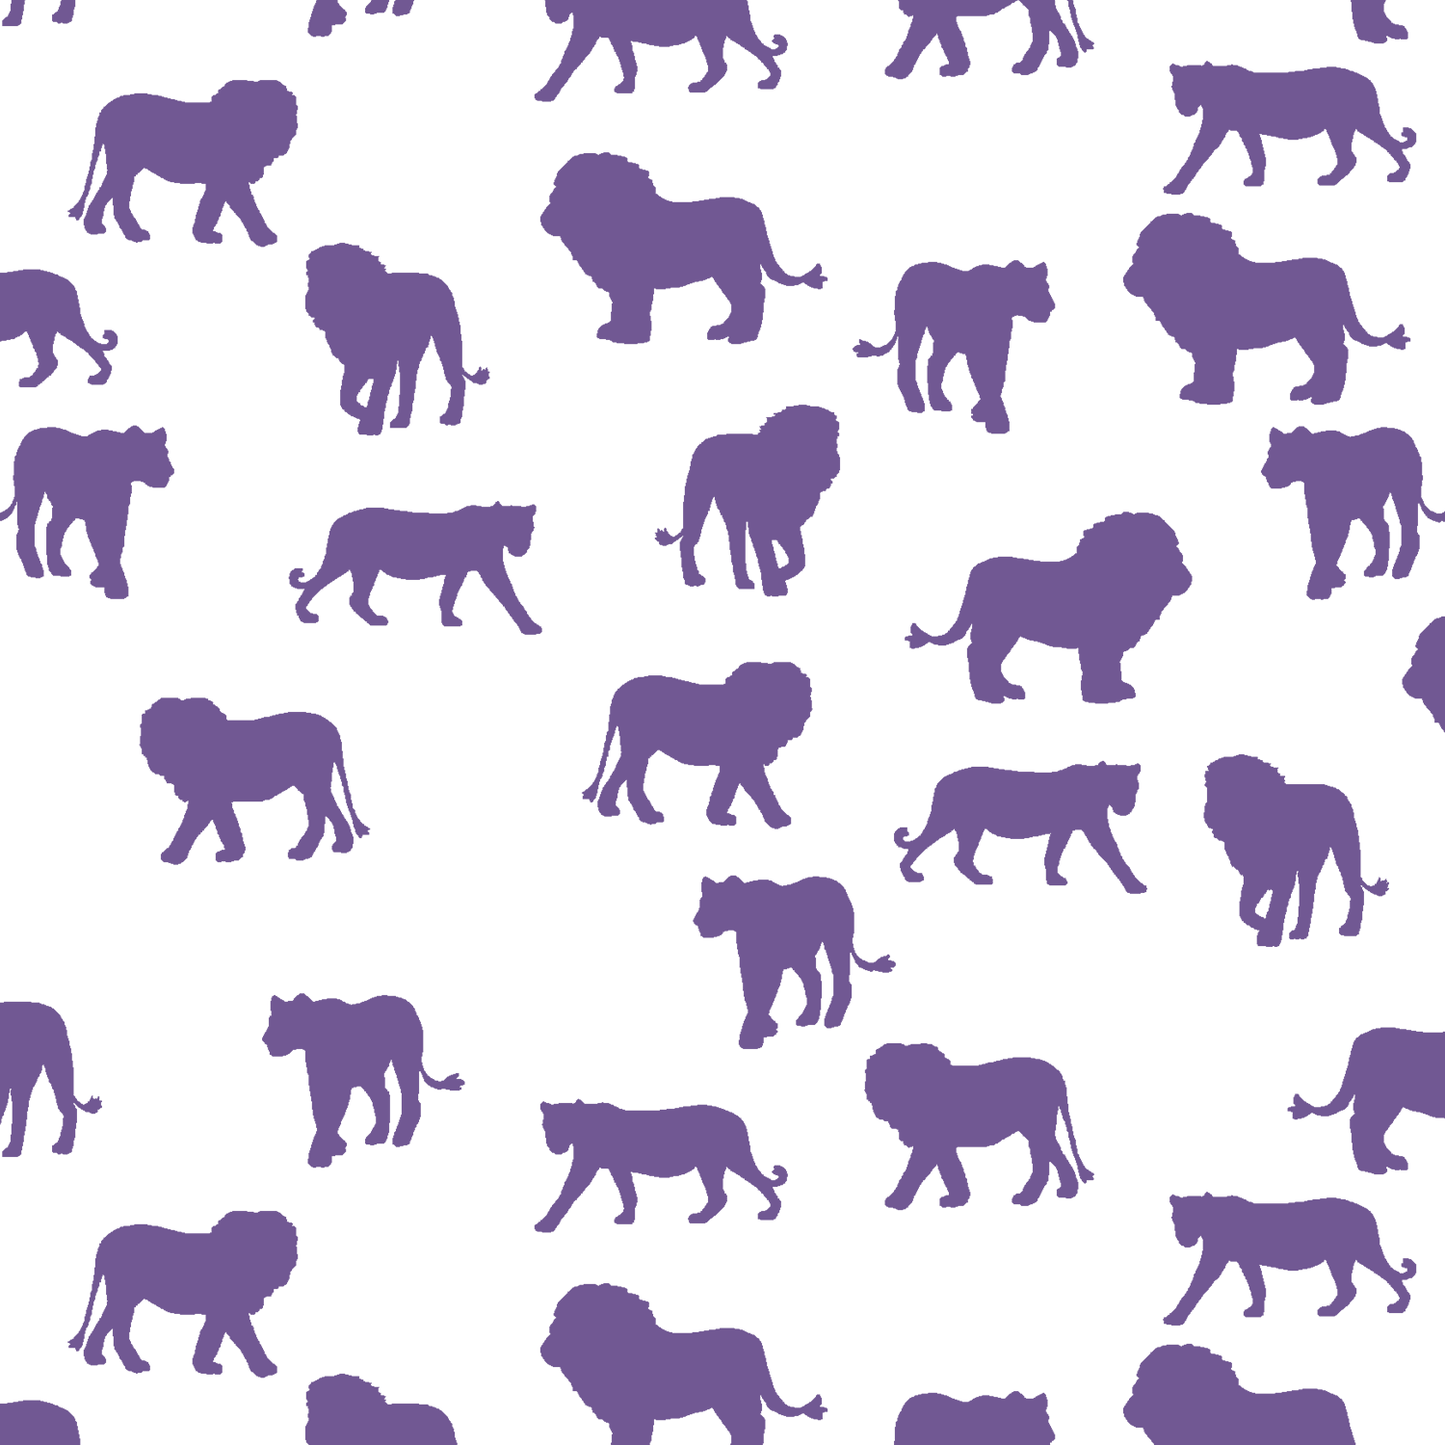 Lion Silhouette in Ultra Violet on White